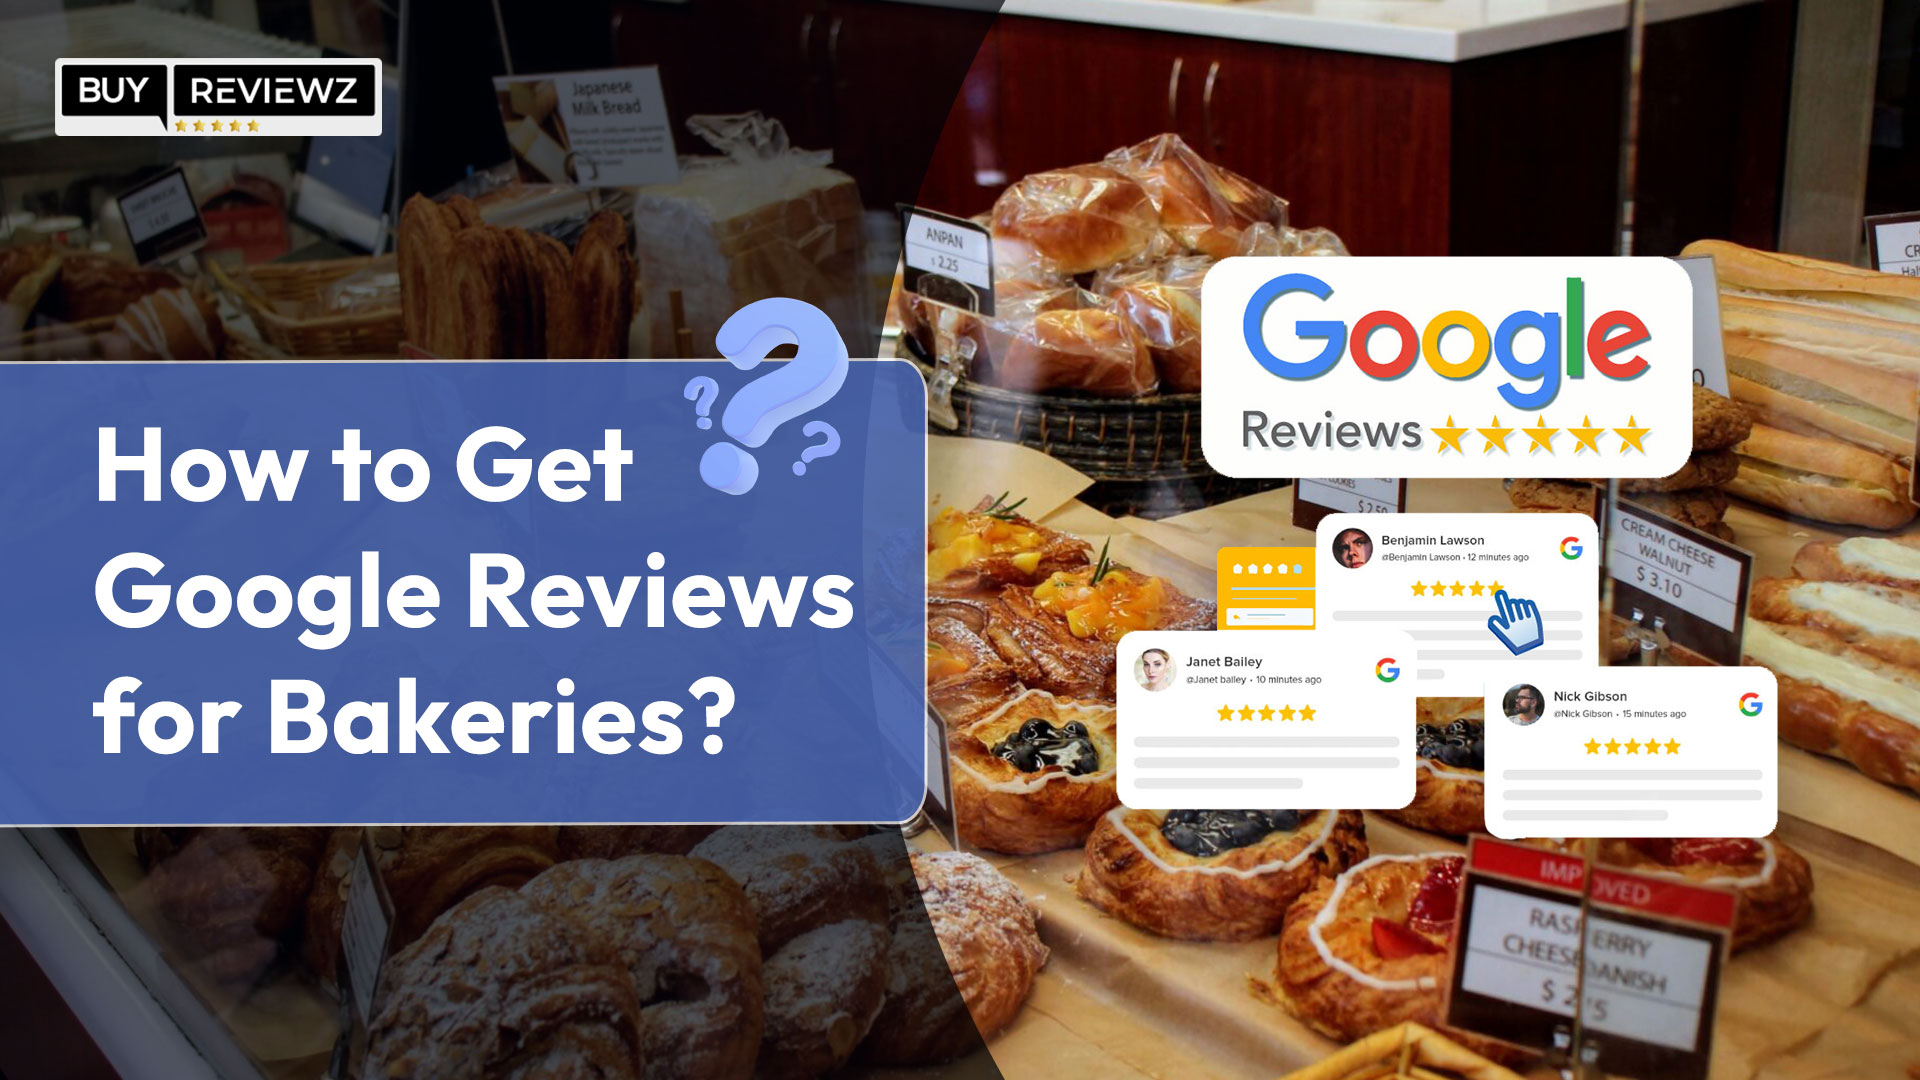  How to Get Google Reviews for Bakeries Business